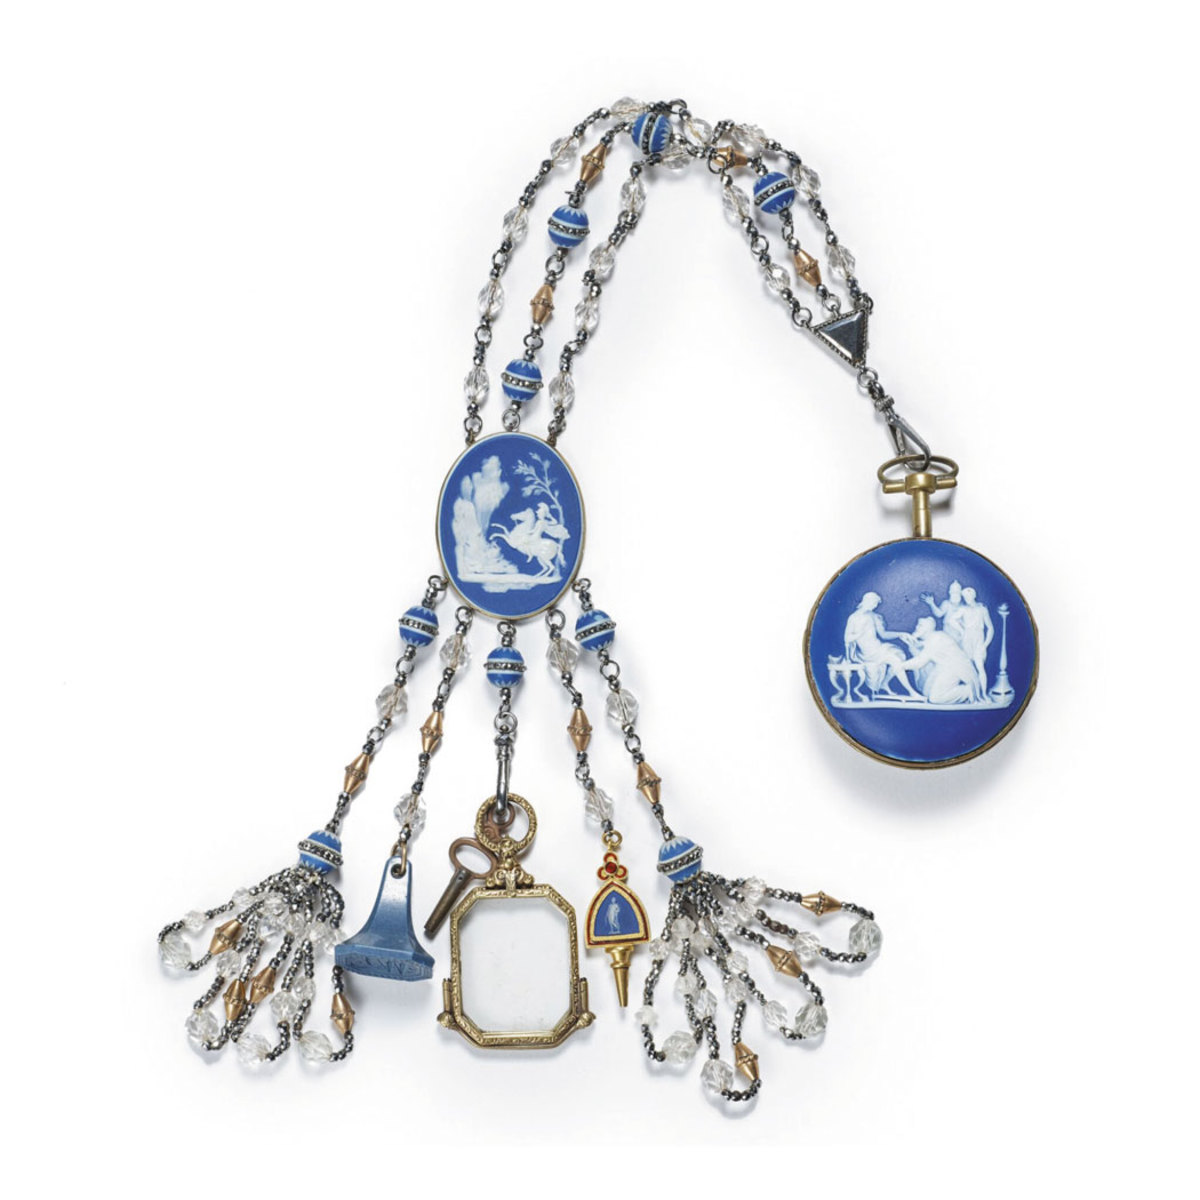 A Wedgwood blue-and-white Jasperware and steel-cut chatelaine, circa 1800, features a watch case and three chains of cut-steel, cut glass and jasper beads with various attachments, including clusters of glass beads, two keys and a seal; 16-1/2” l. This sold at auction for $2,250.